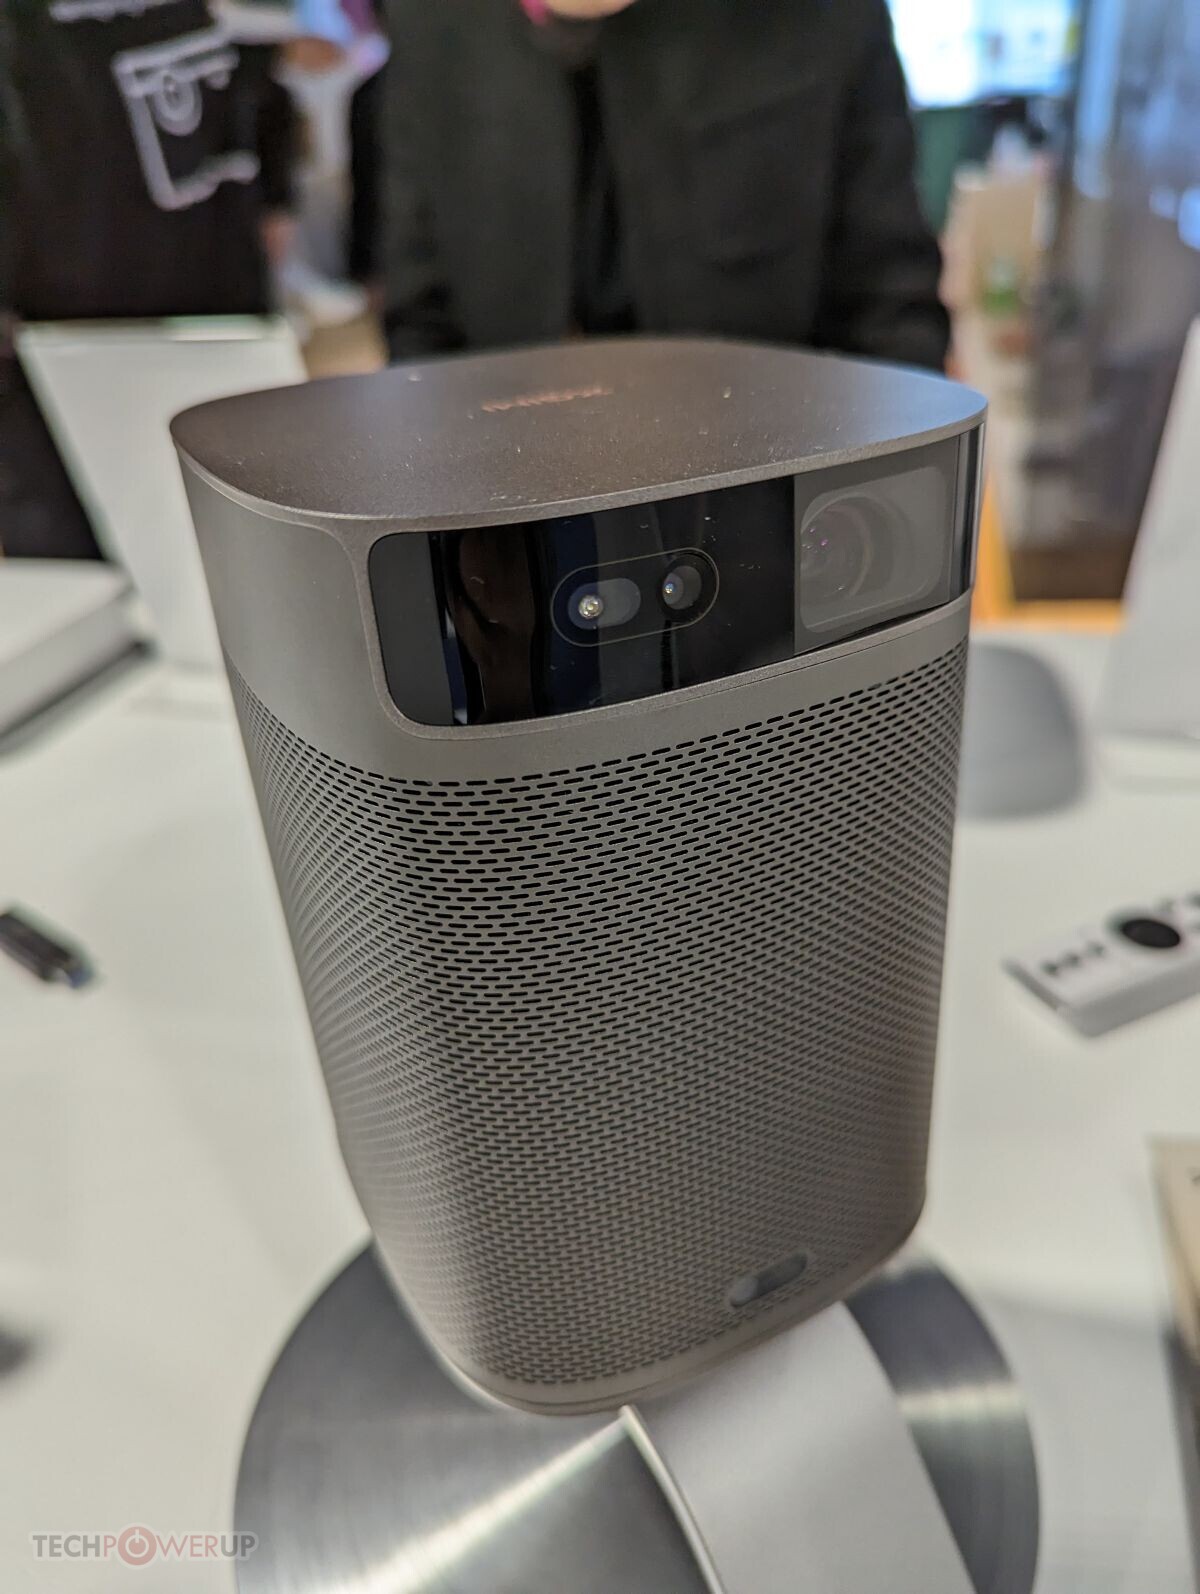 XGIMI at the 2023 International CES: RS Pro 2 and MoGo 2 Pro